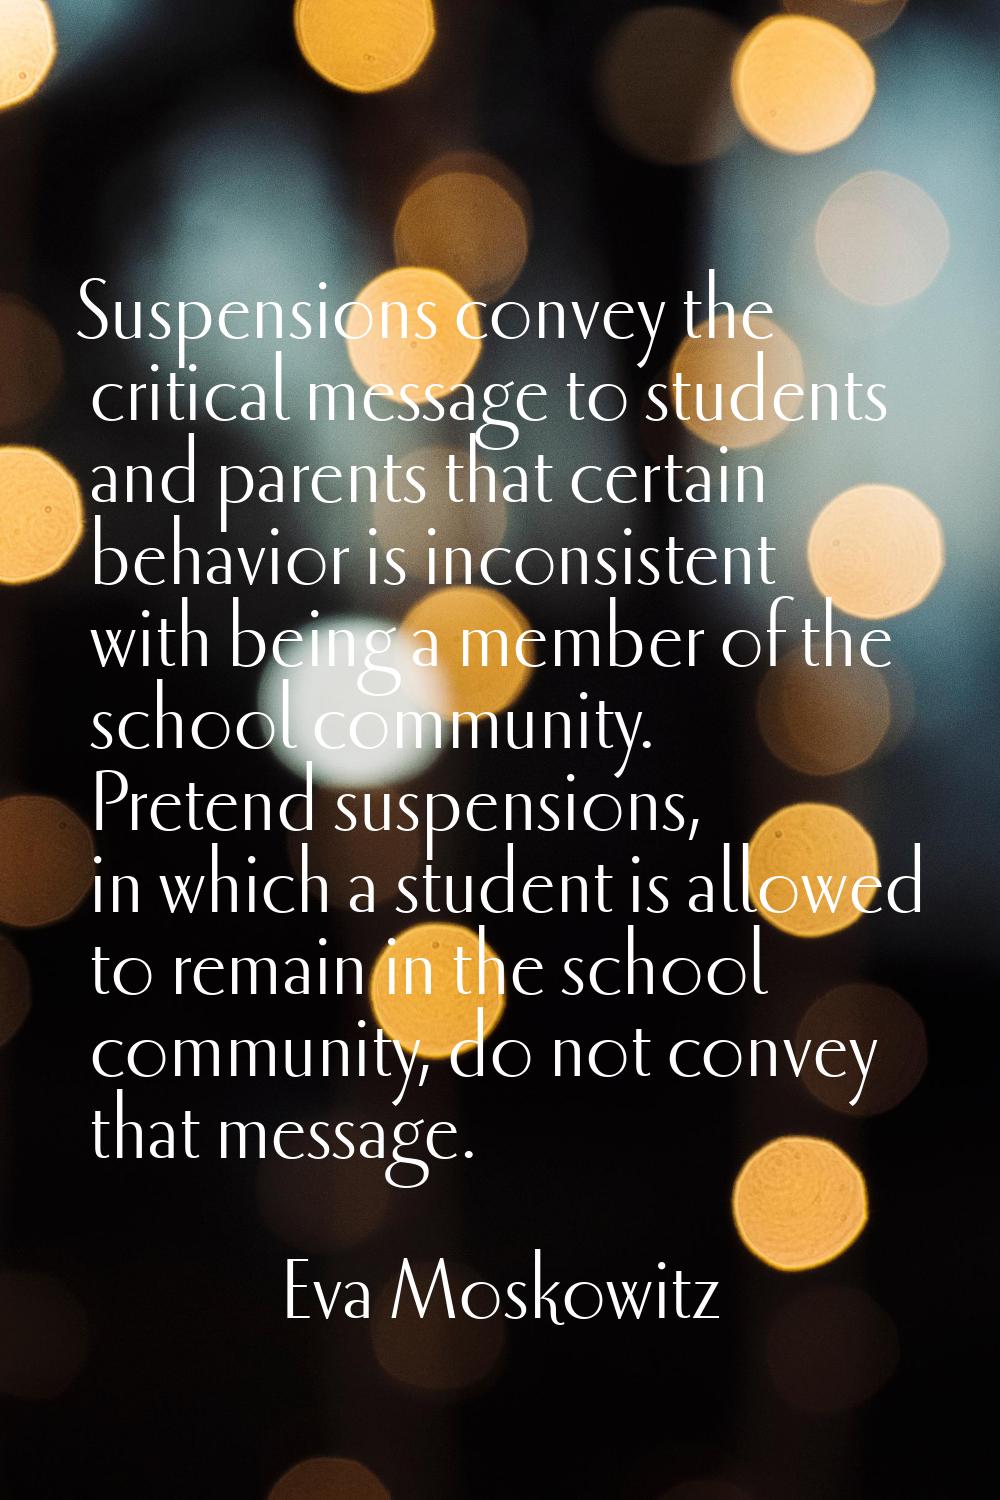 Suspensions convey the critical message to students and parents that certain behavior is inconsiste